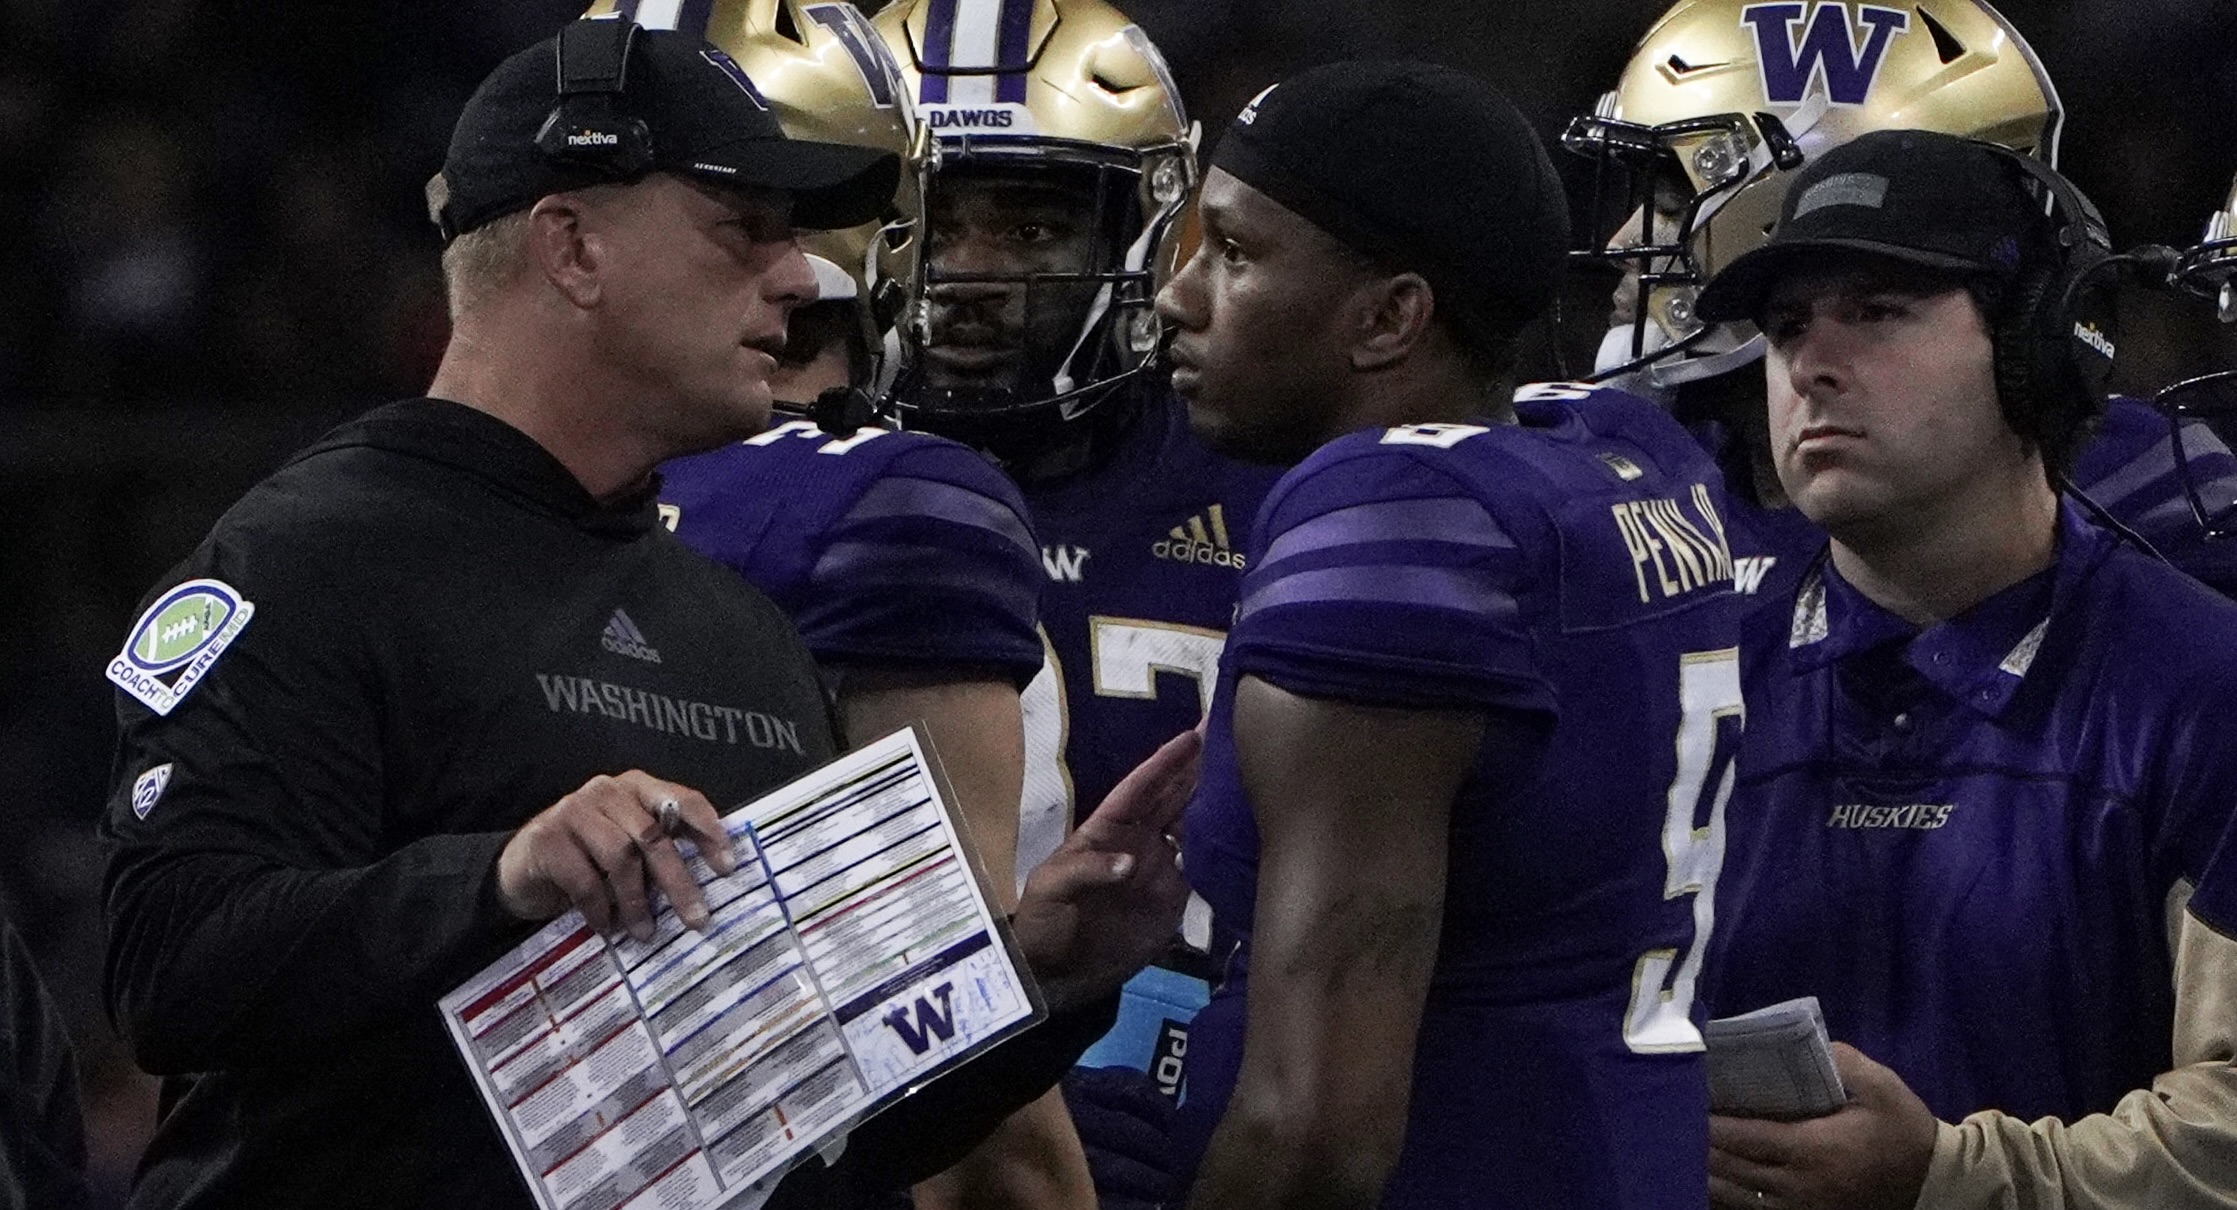 Fautanu on Penix: 'All 32 NFL Teams Should Be Scouting Him' - Sports Illustrated Washington Huskies News, Analysis and More